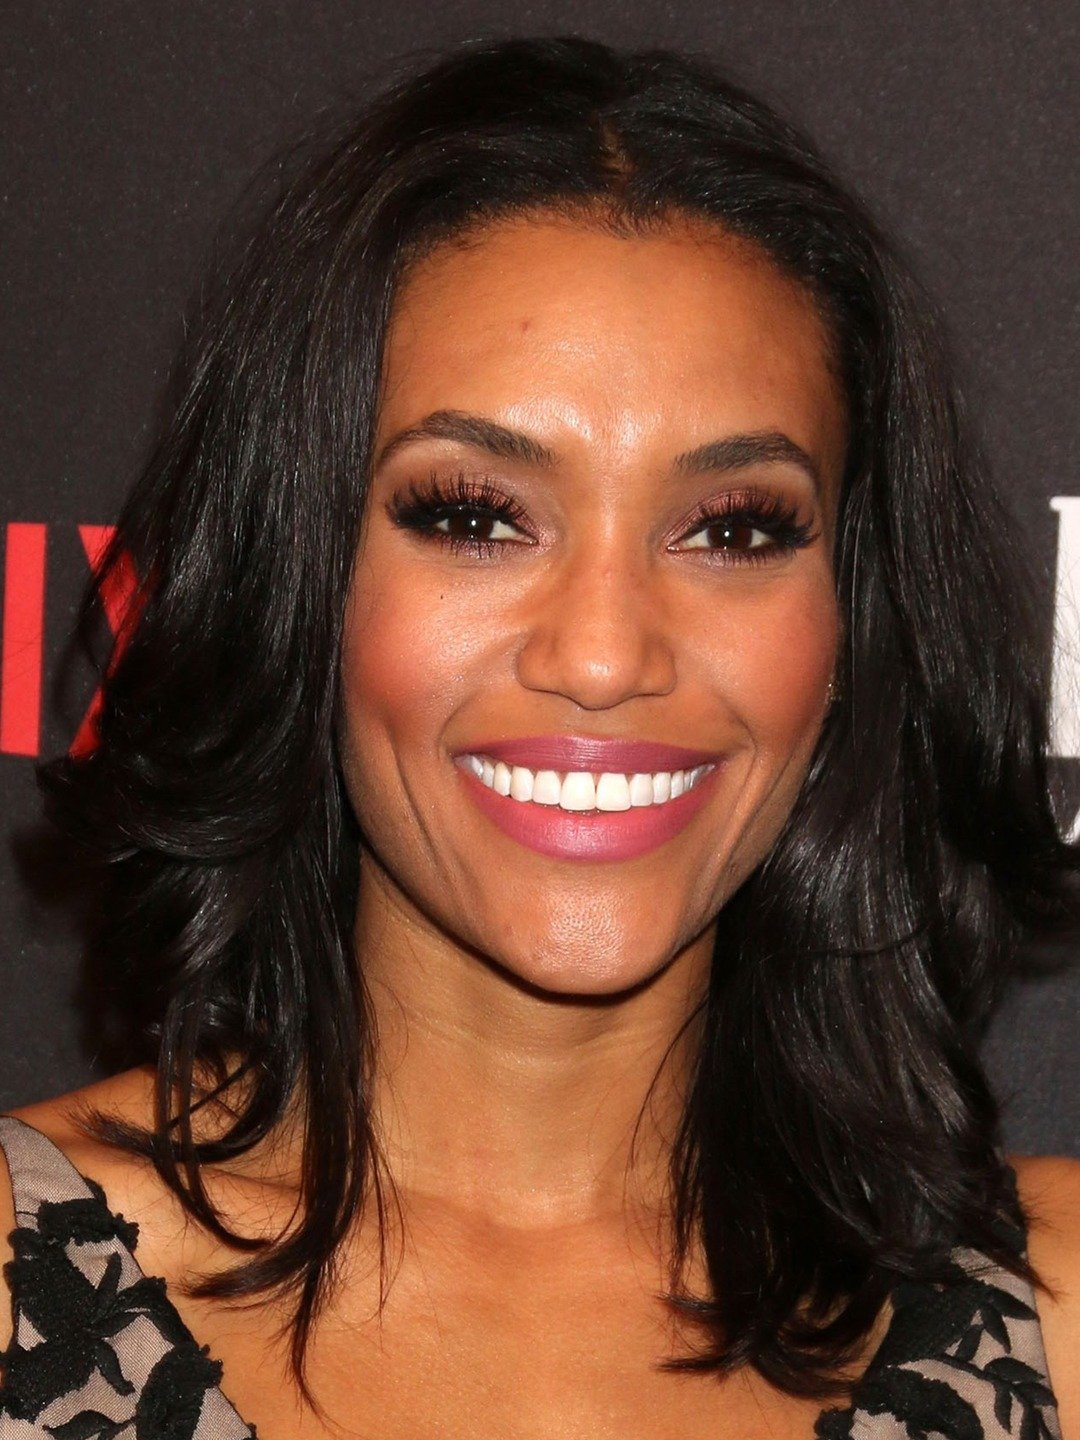 How tall is Annie Ilonzeh?